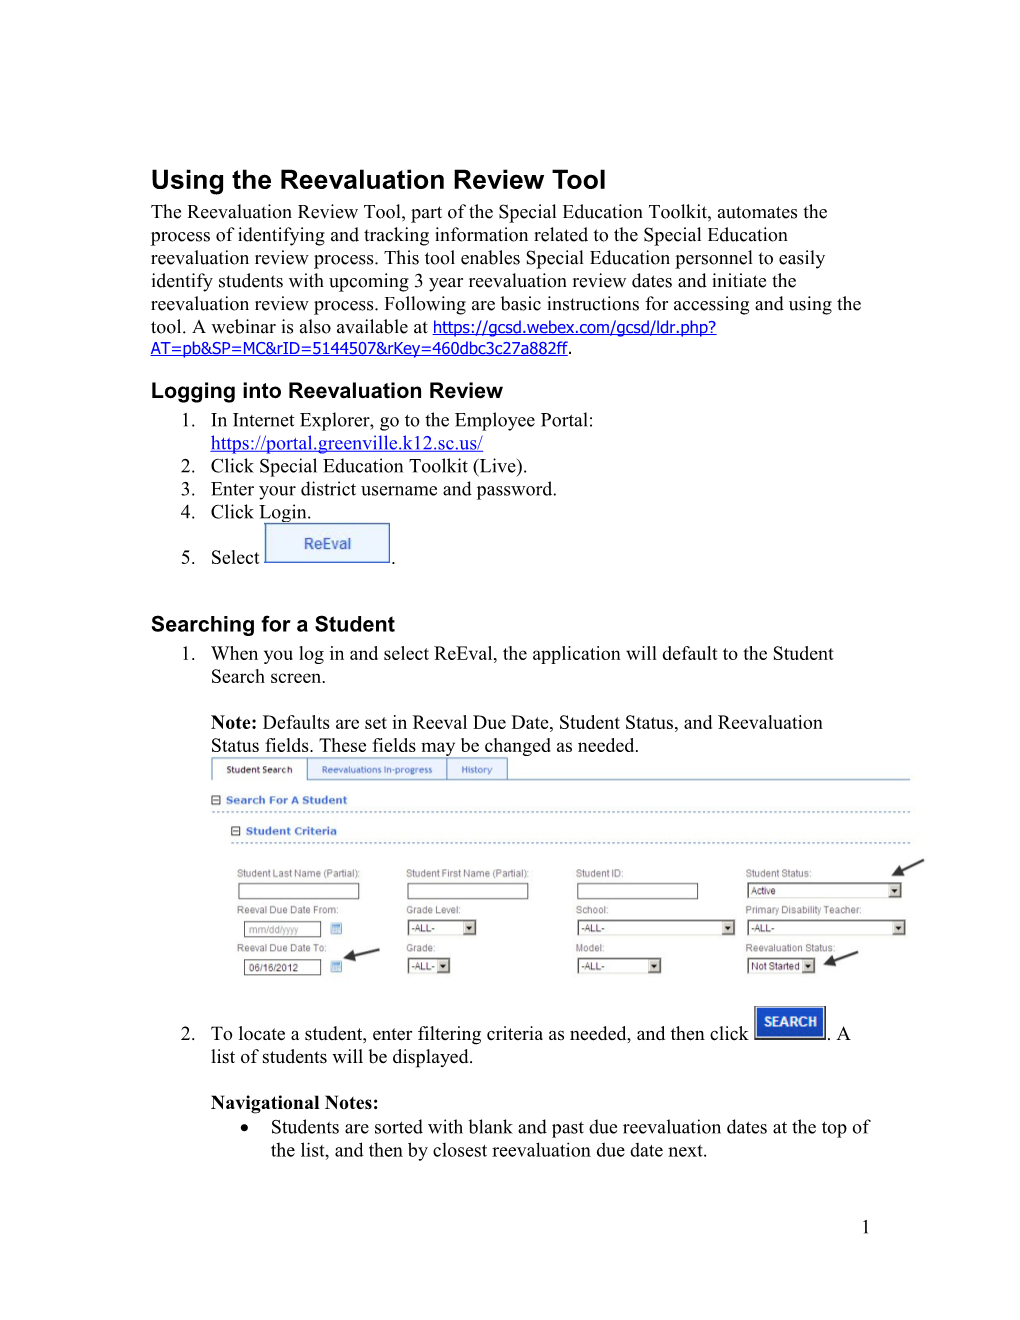 Using the Reevaluation Review System